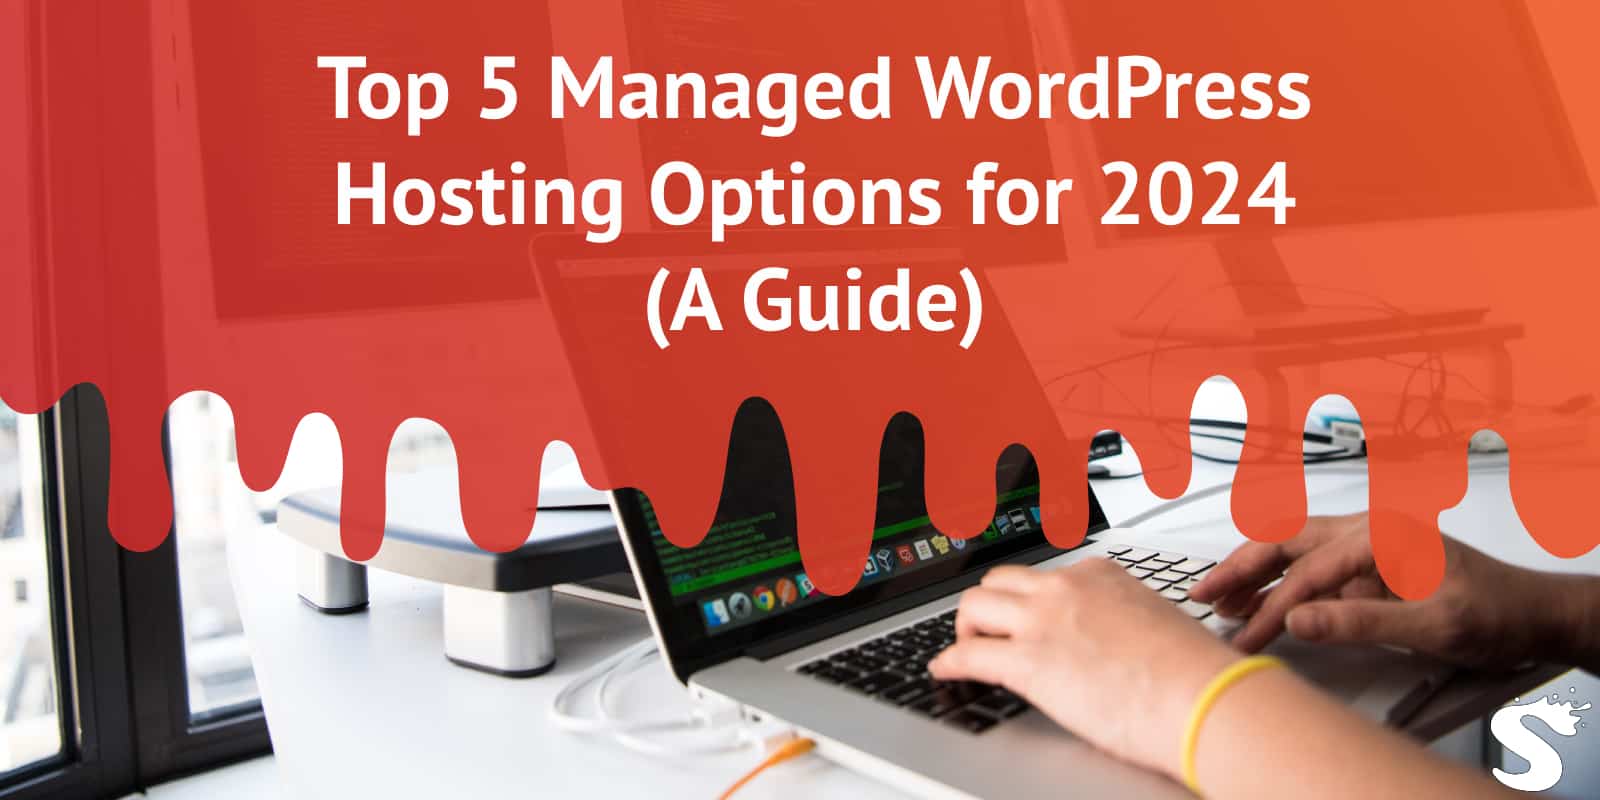 Top 5 Managed WordPress Hosting Options for 2024 (A Guide)